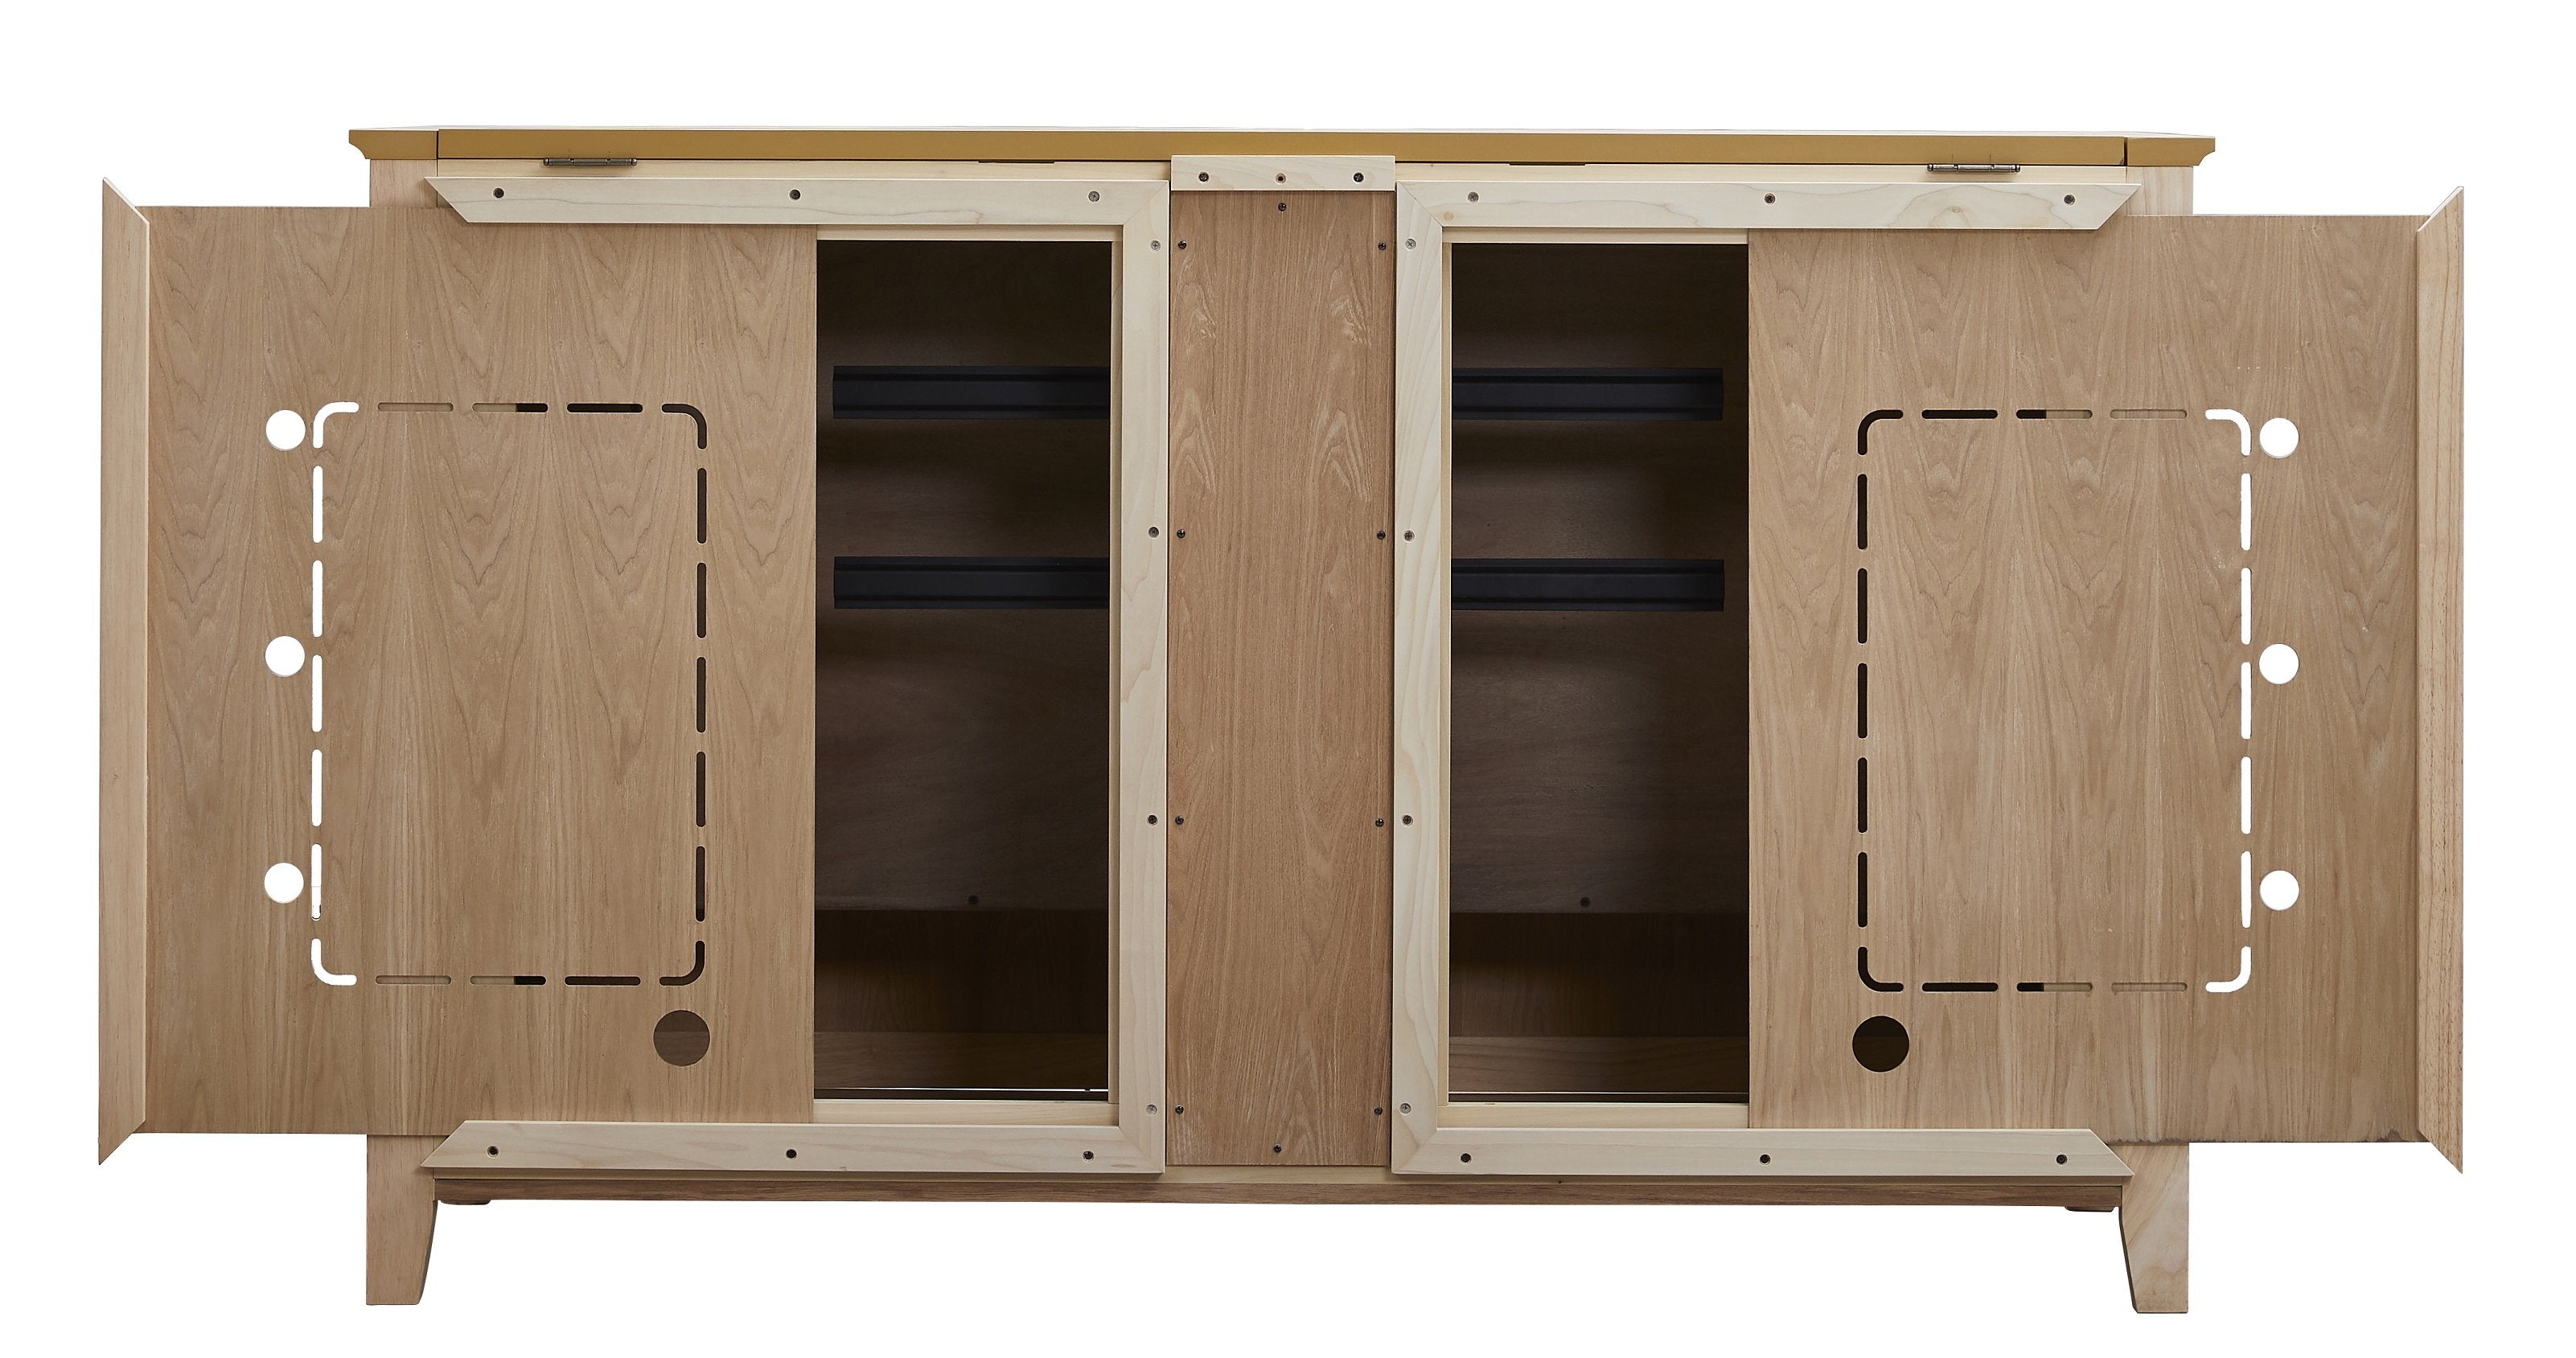 The Claymont Unfinished 70163 TV Lift Cabinet for 65 inch Flat screen TVs opened from the back.